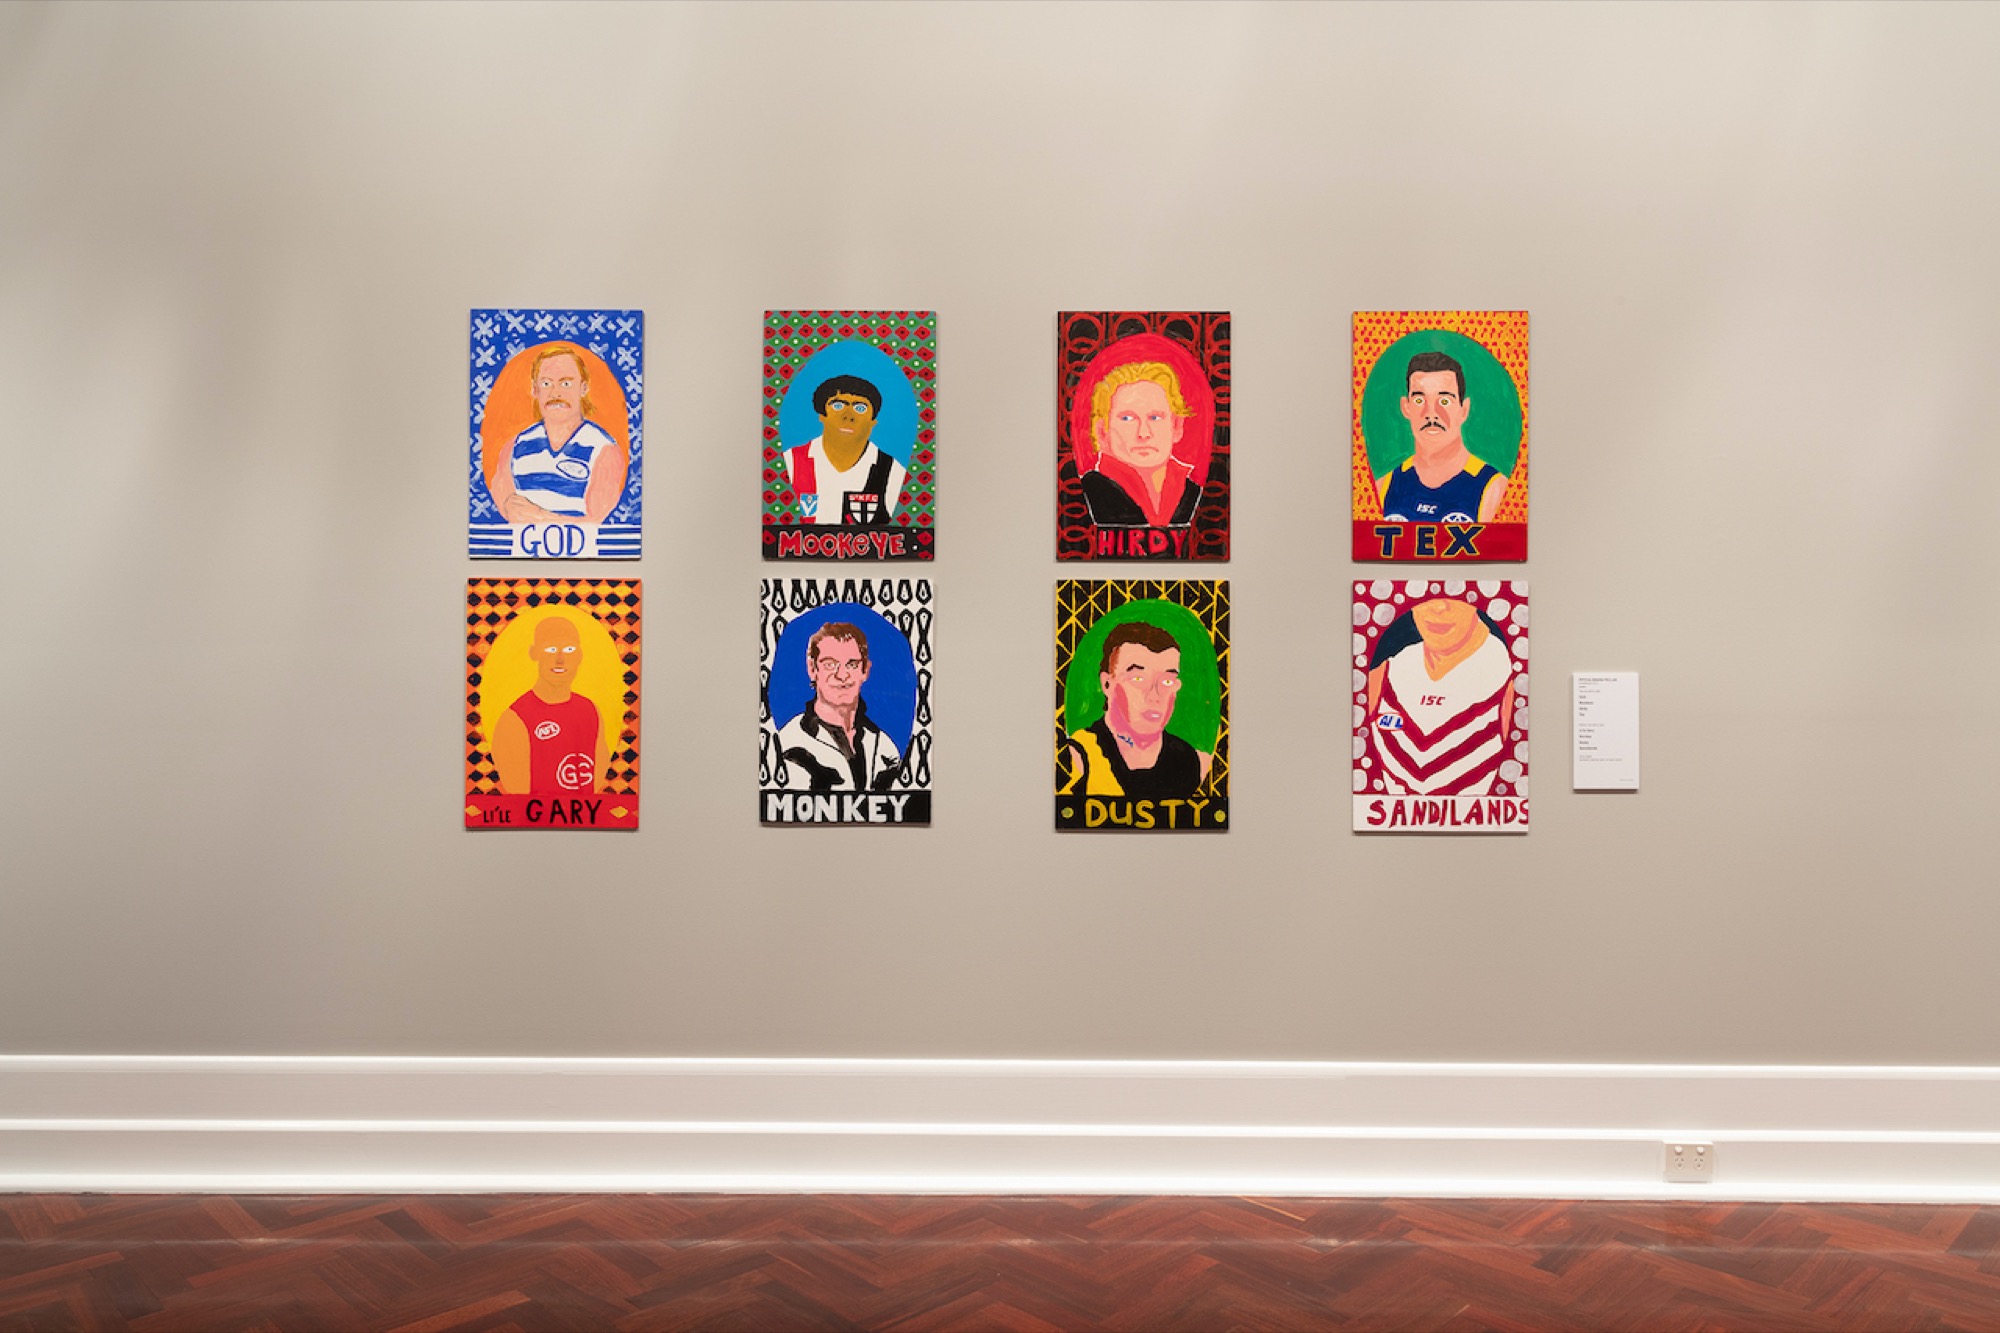 Pitcha Makin Fellas, installation view of <em>Join the Club</em>, 2015-20. Synthetic polymer paint on foam board. © Pitcha Makin Fellas. Photograph: Ben Cox.